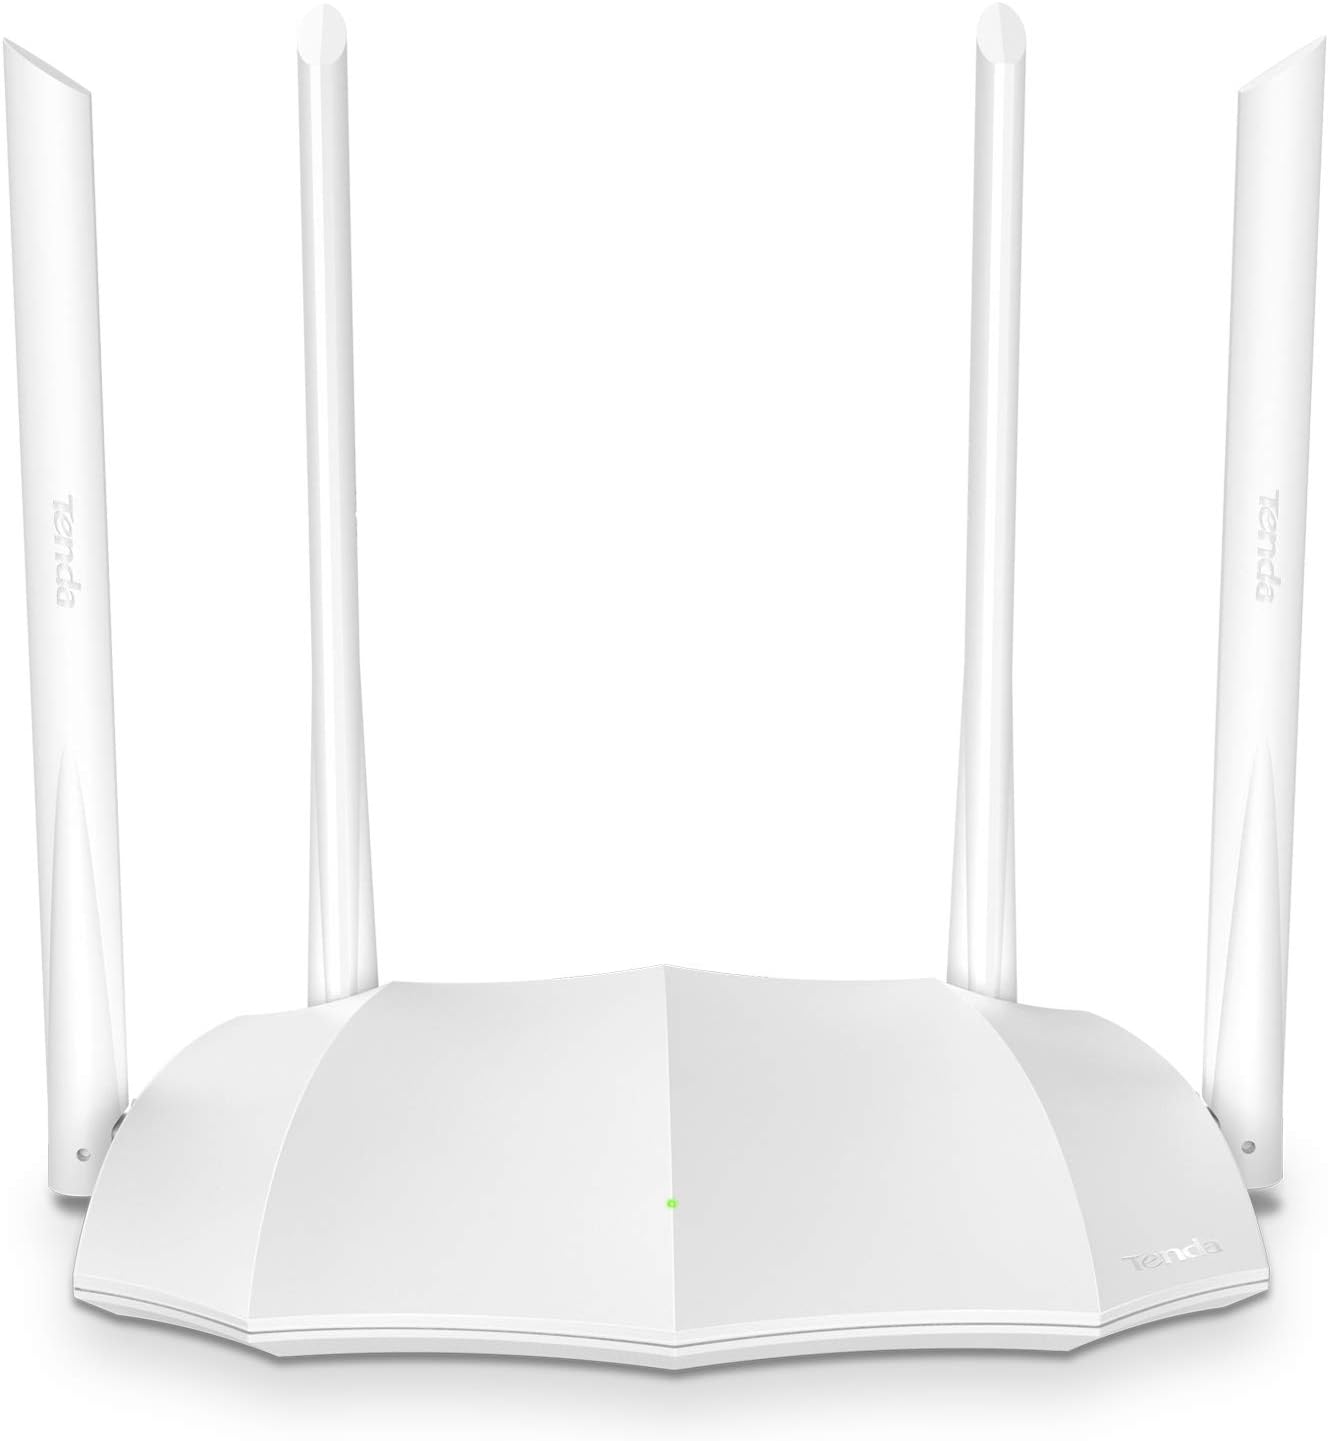 Tenda AC1200 Smart WiFi Router | Dual Band Wireless Internet Router | AP Mode| IPv6 | Guest WiFi, and Parental Controls | Various scenarios | (AC5V3.0), White